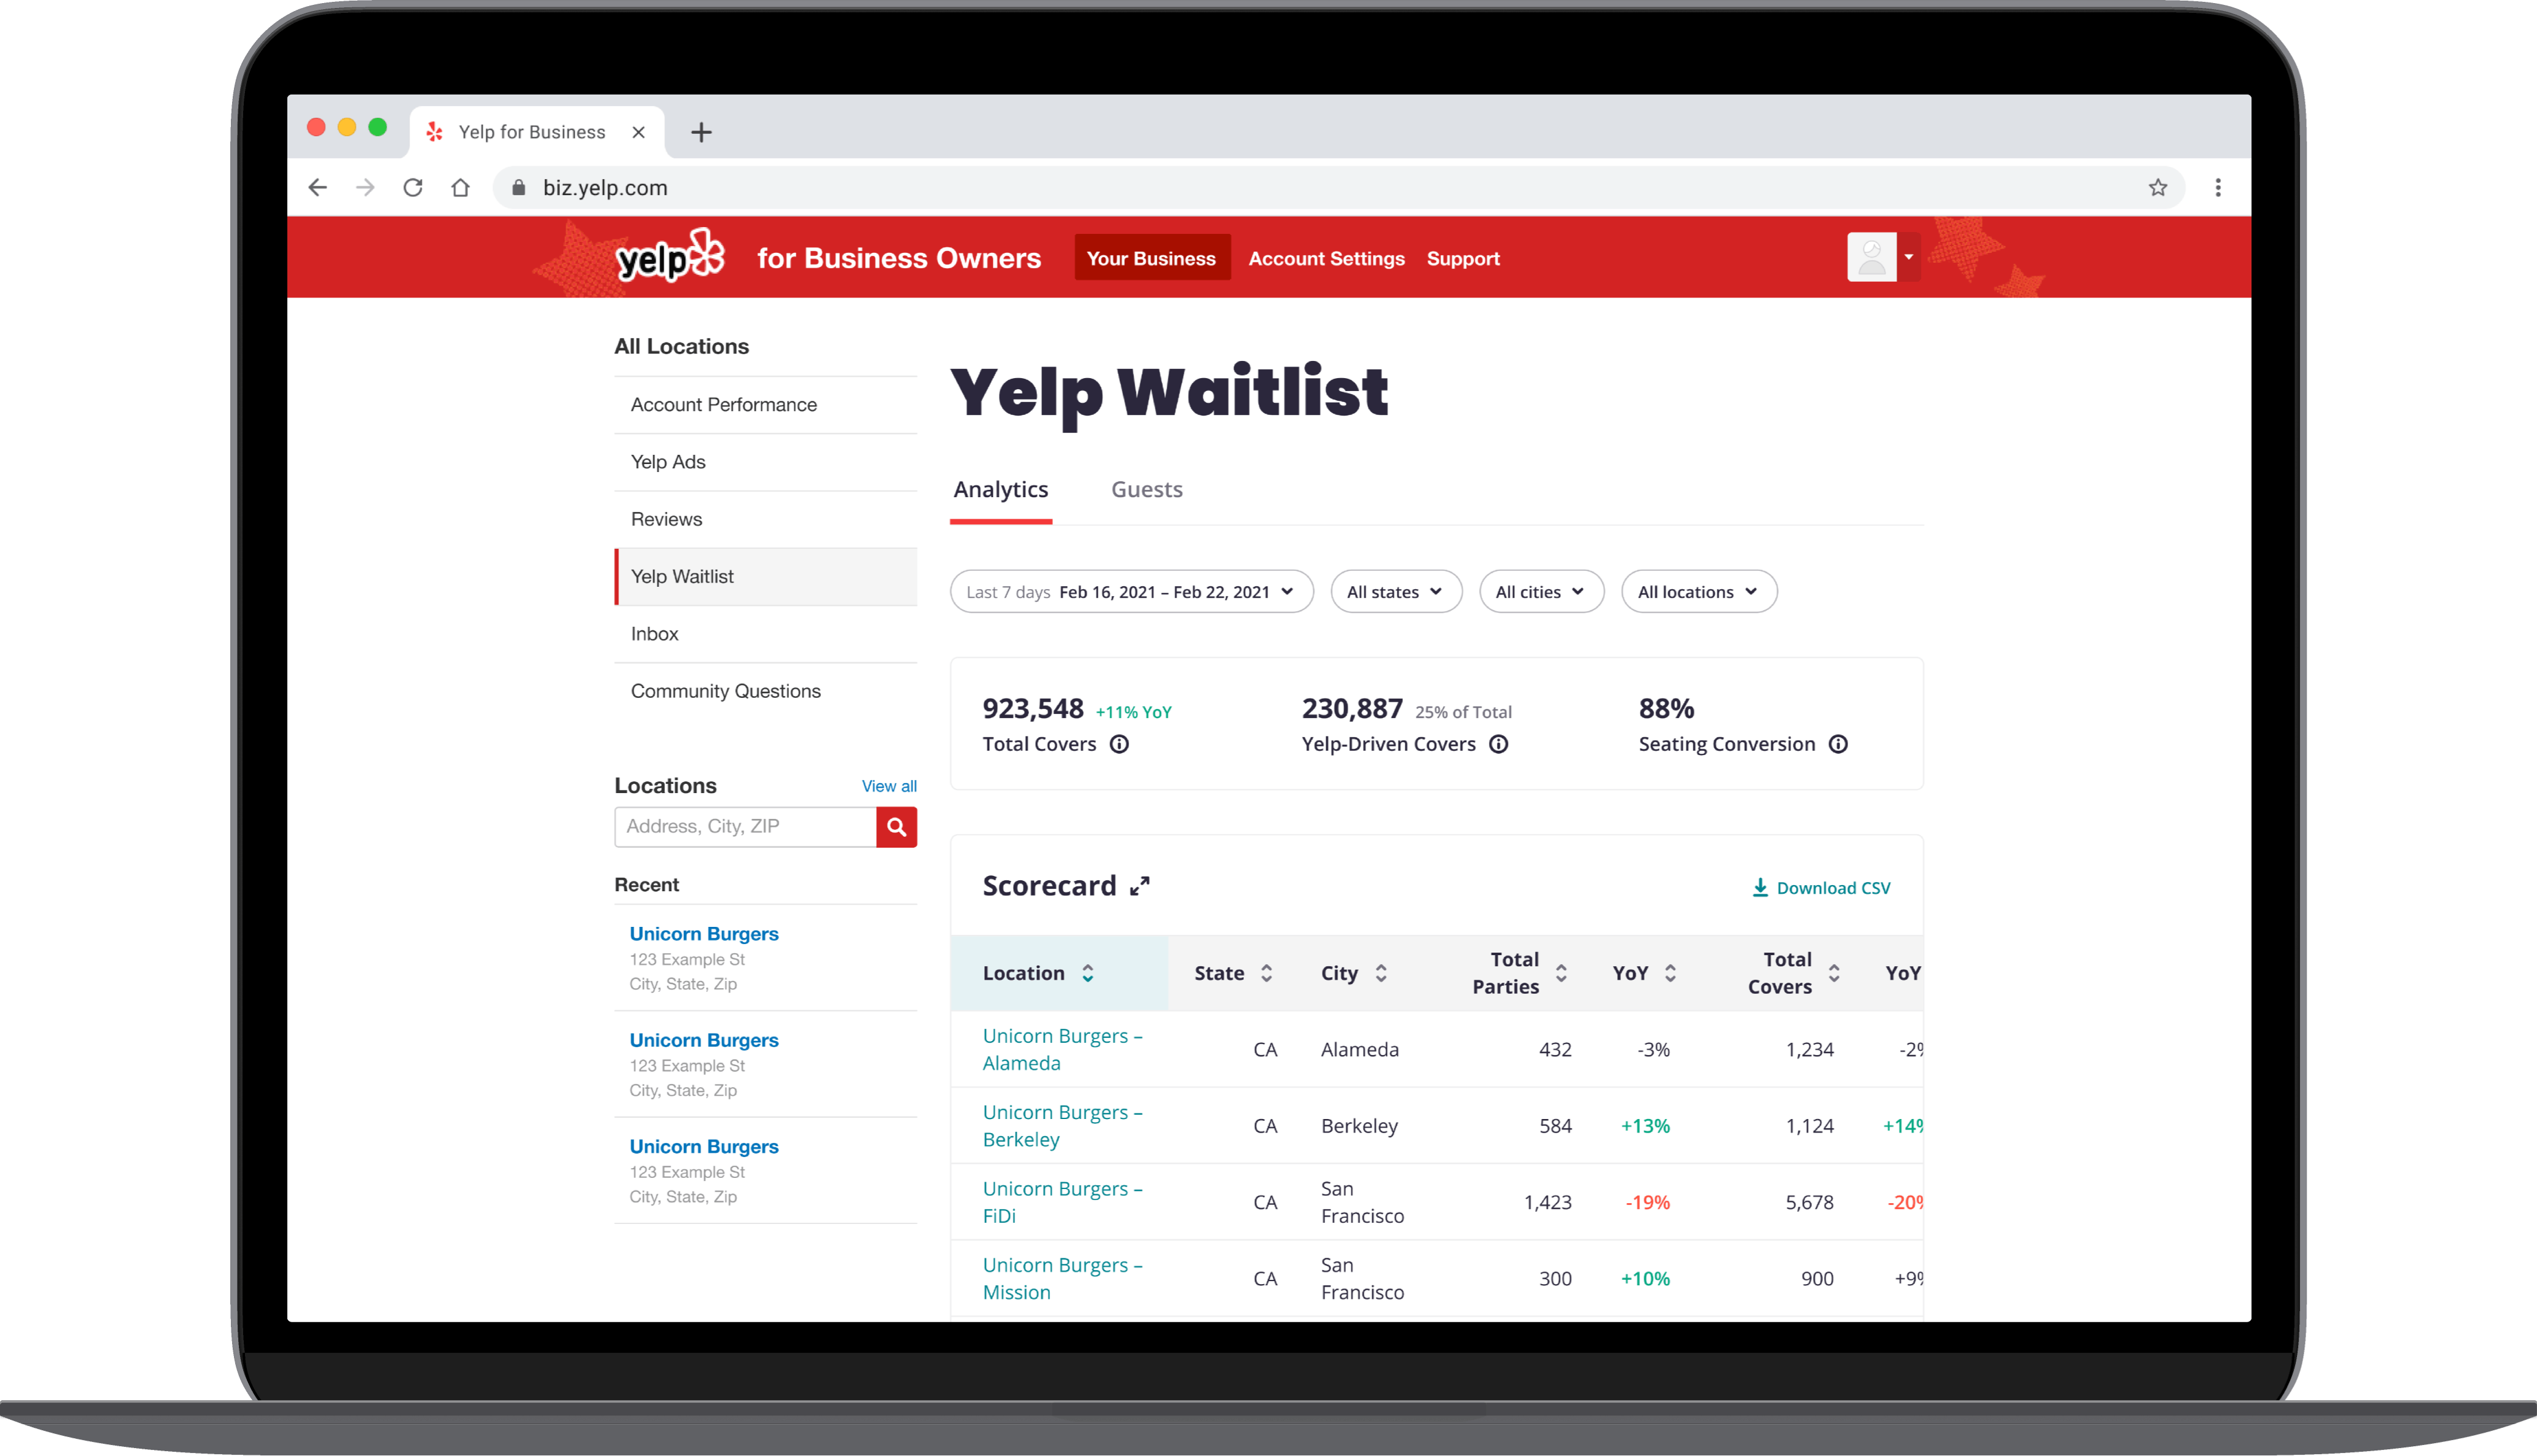 Yelp's diner analytics for a multi-location restaurant.